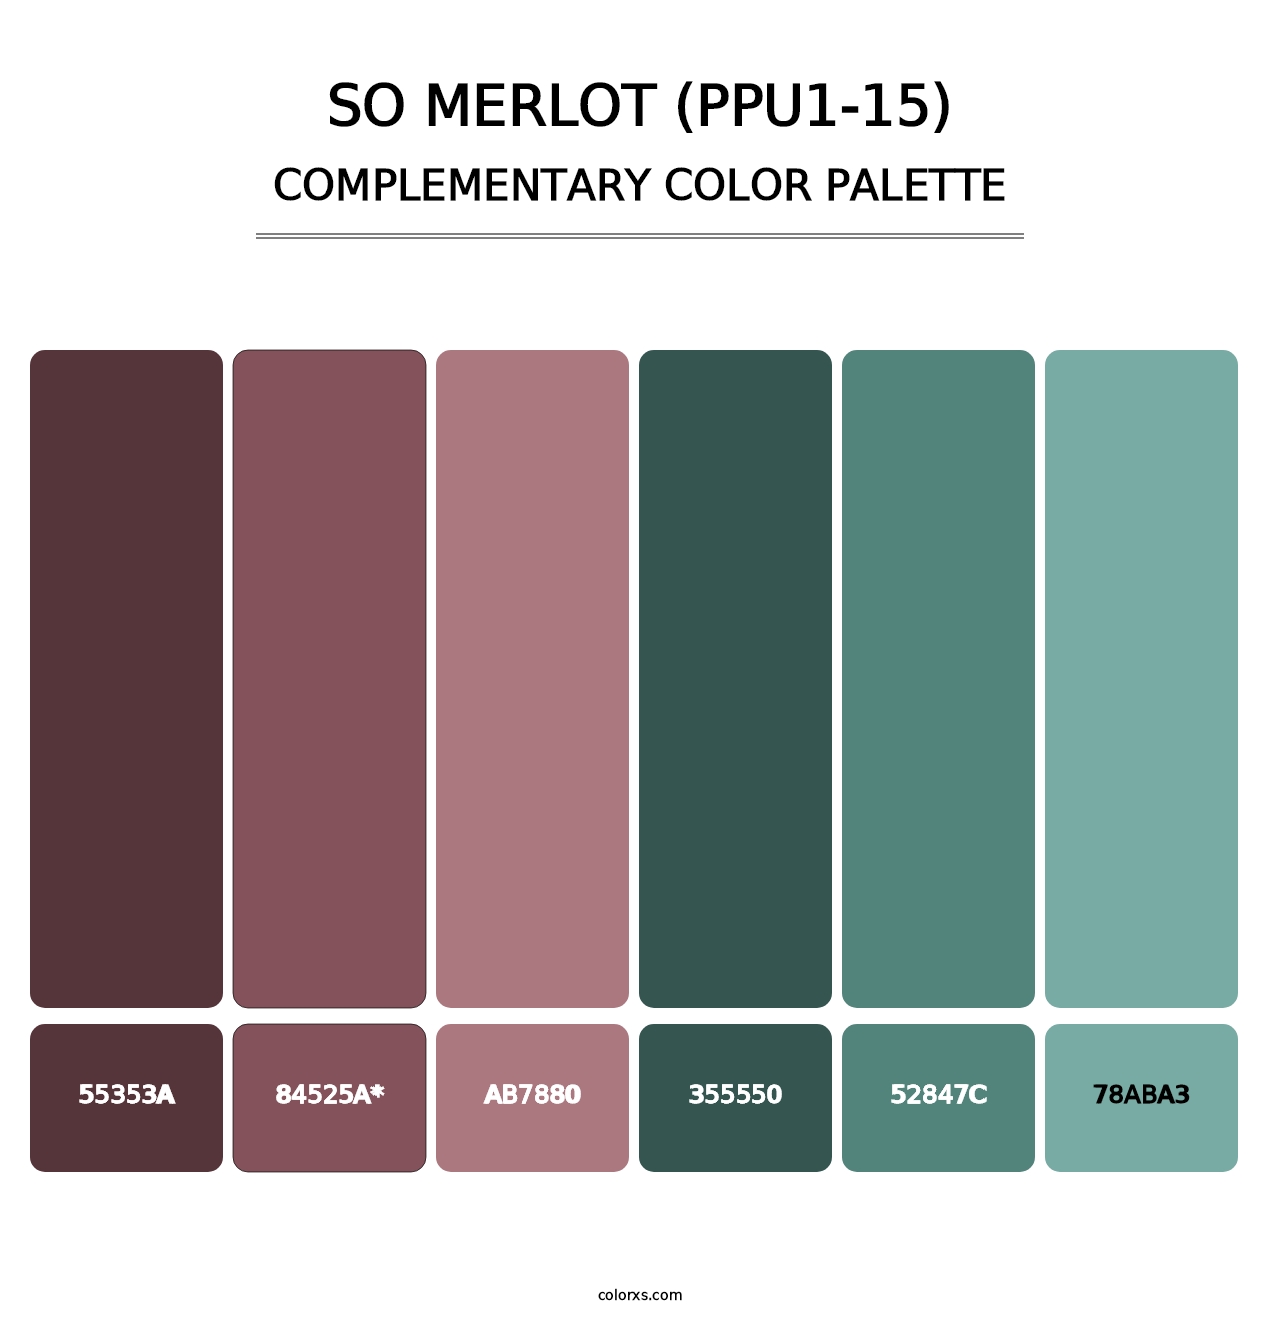 So Merlot (PPU1-15) - Complementary Color Palette